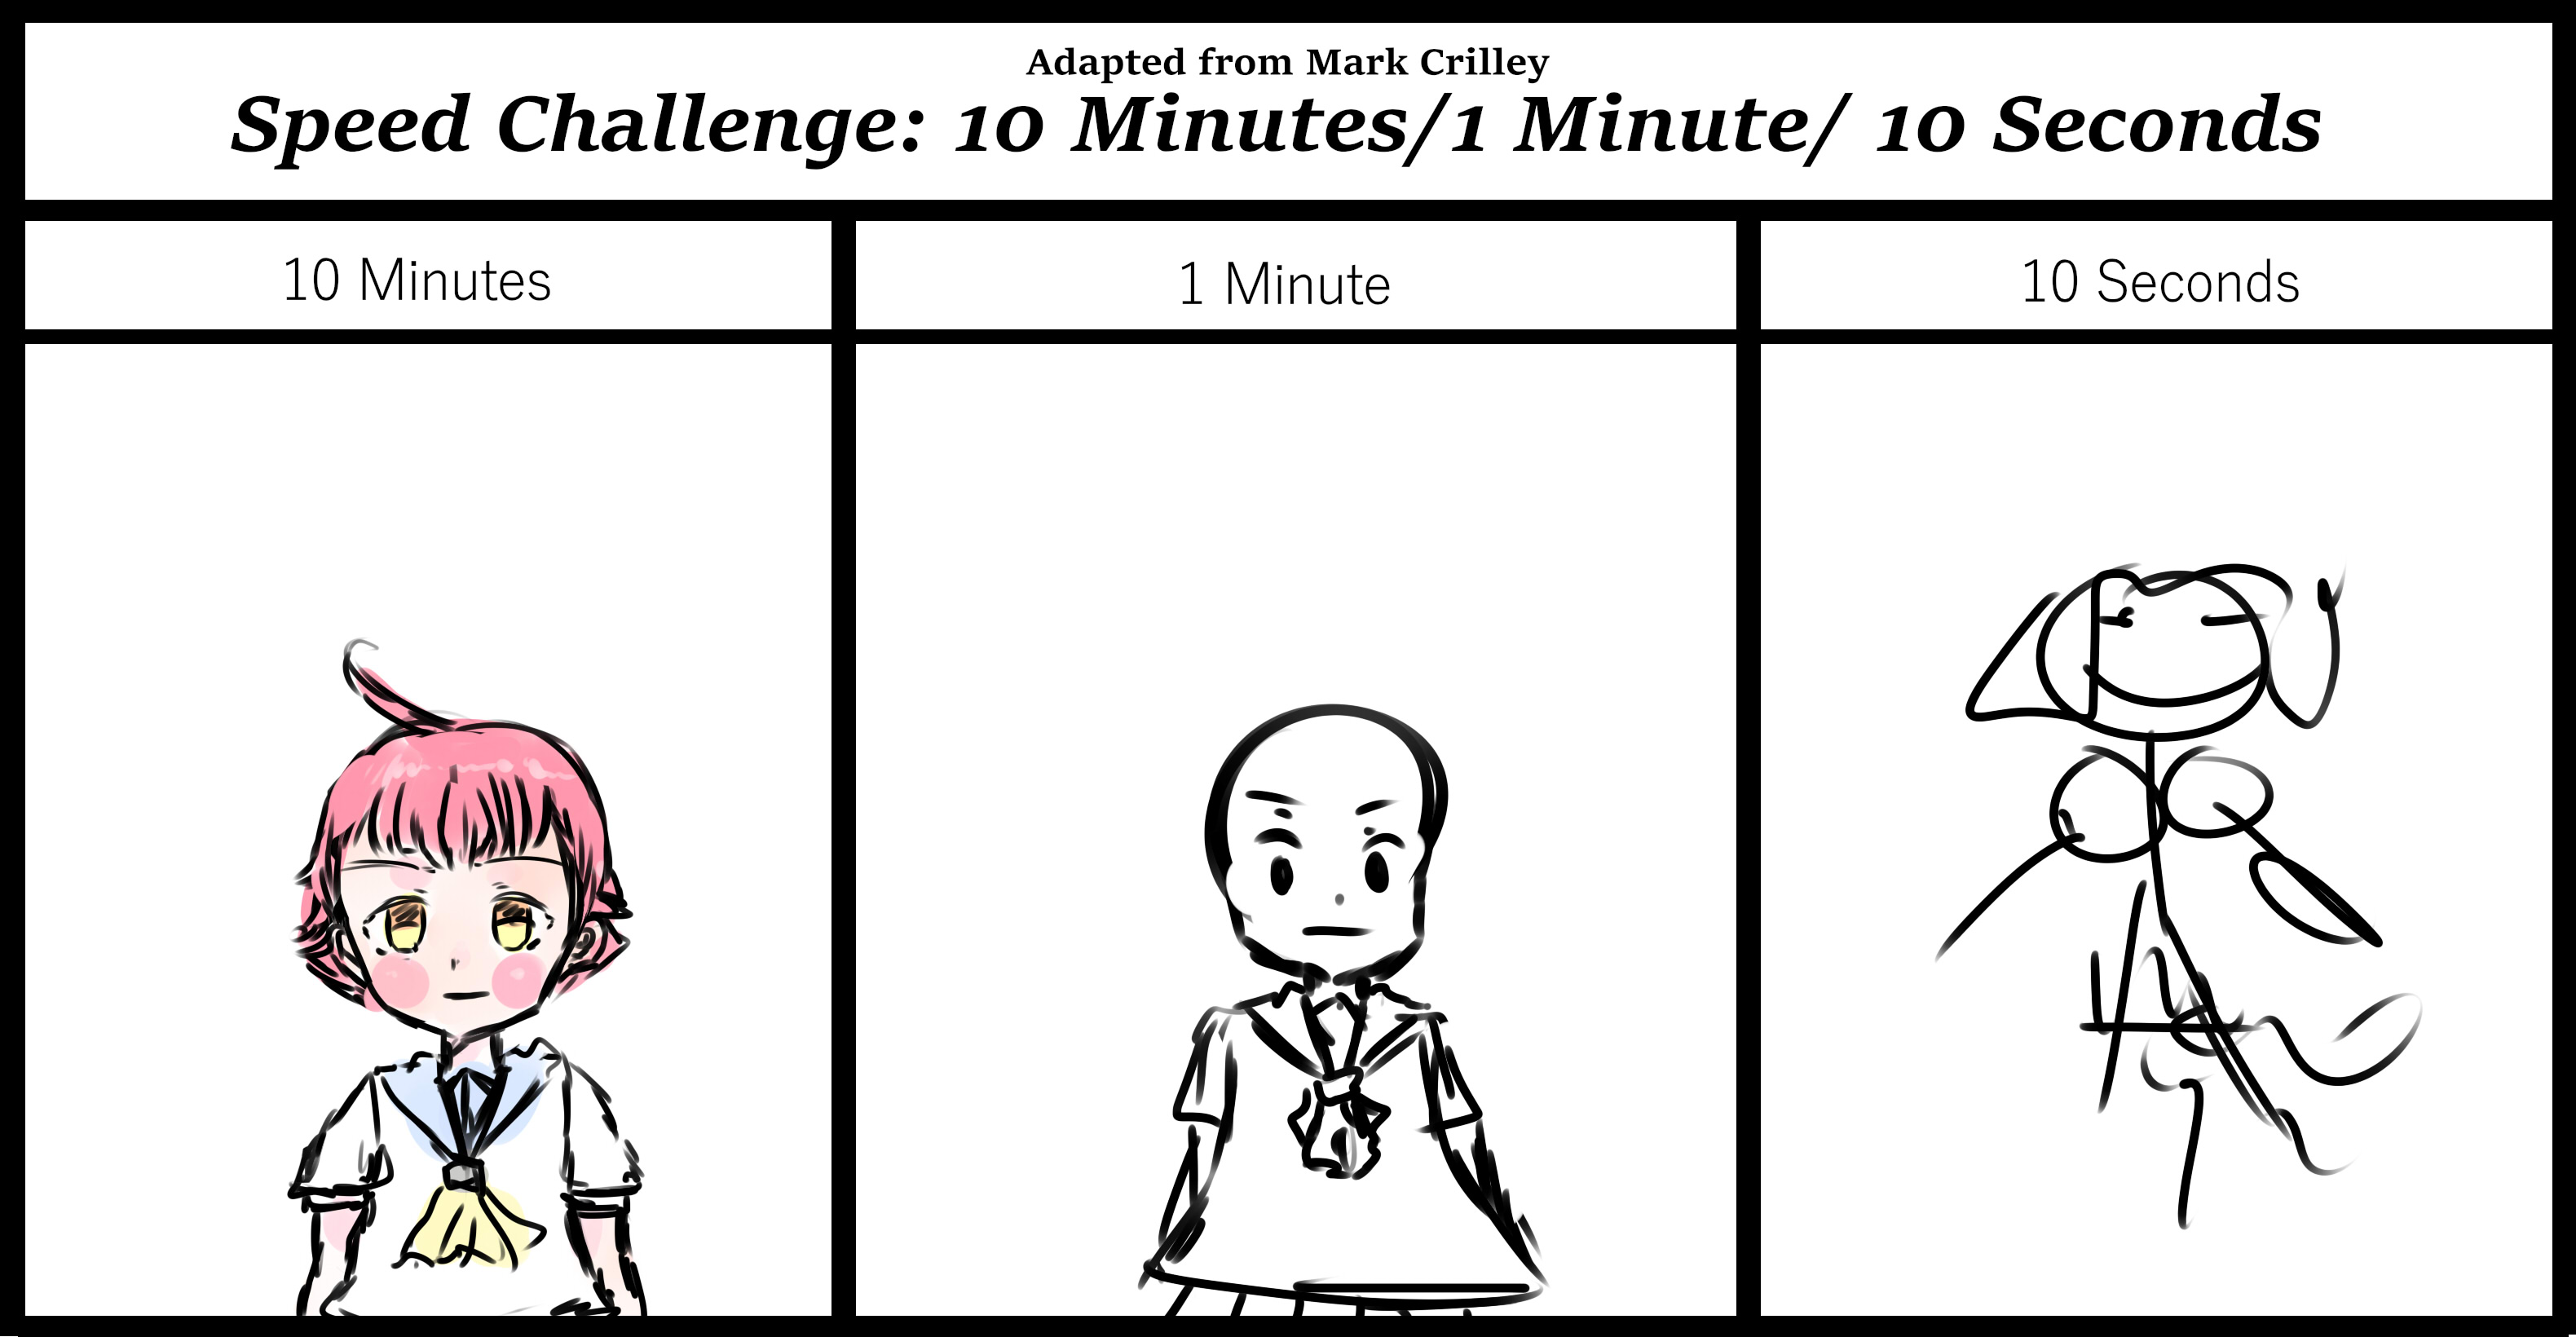 SPEED DRAWING CHALLENGE】10 Minutes, 1 Minute, 10 Seconds 